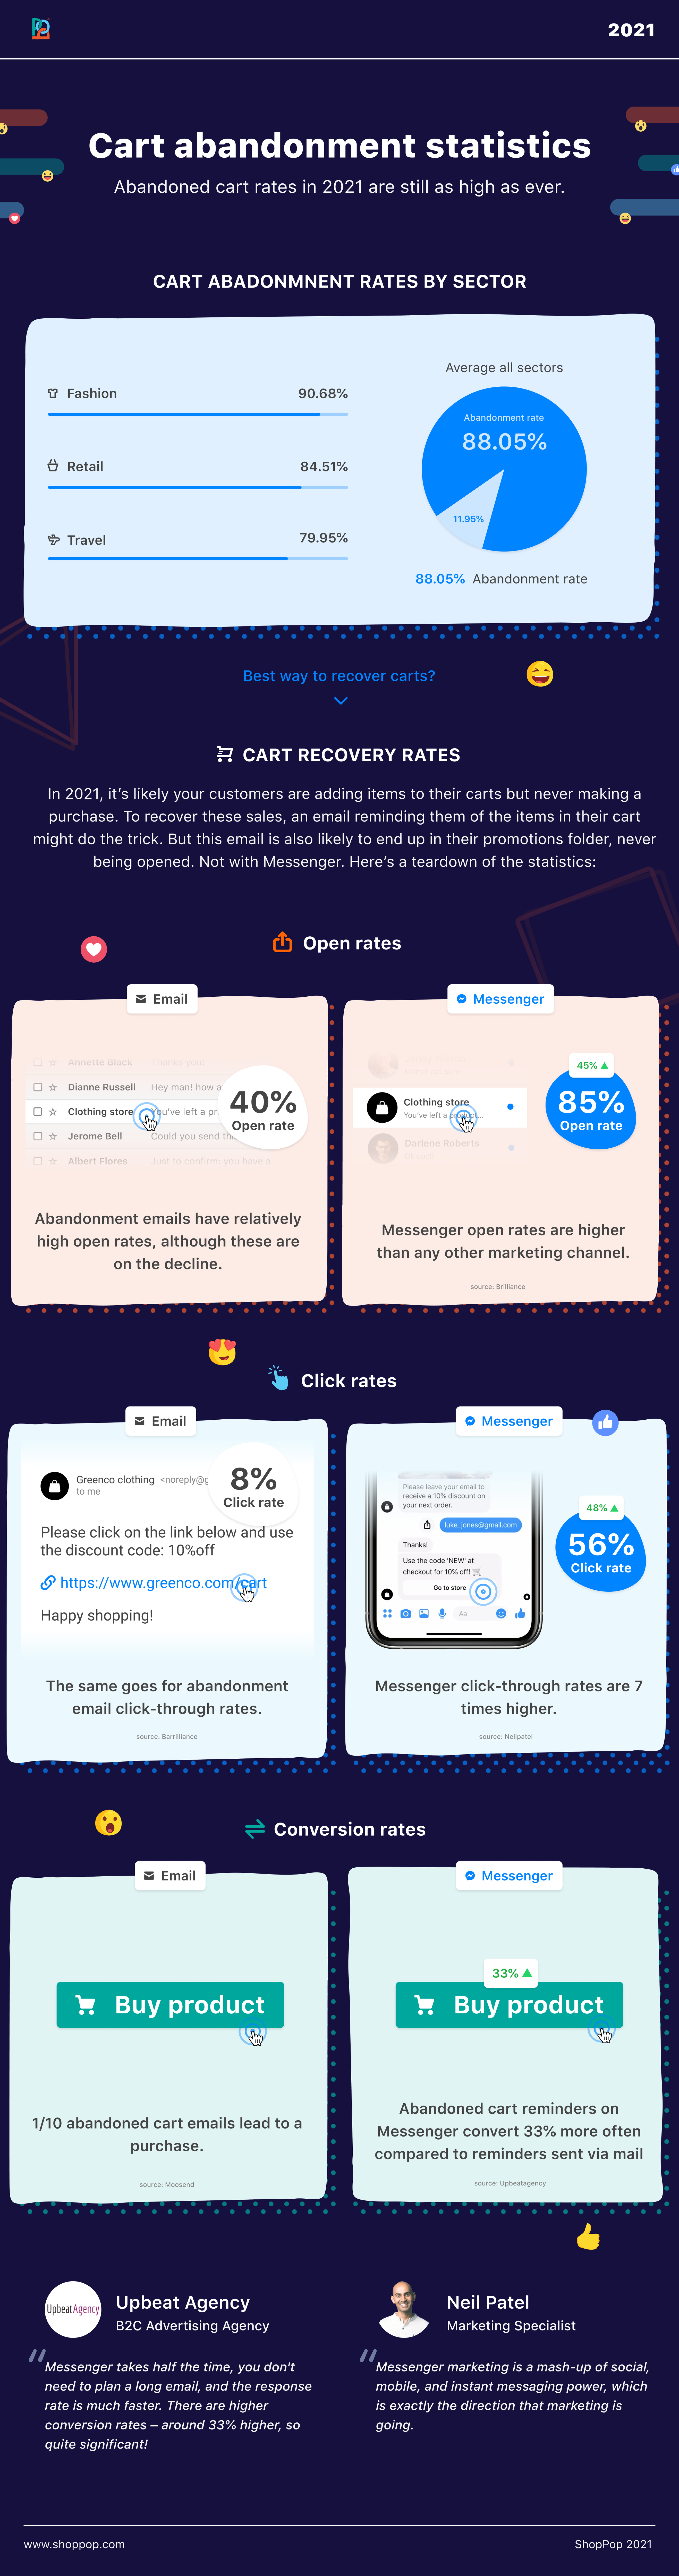 Infographic-Abandoned-Cart-Recovery-Statistics-Email-vs-Messenger-2021